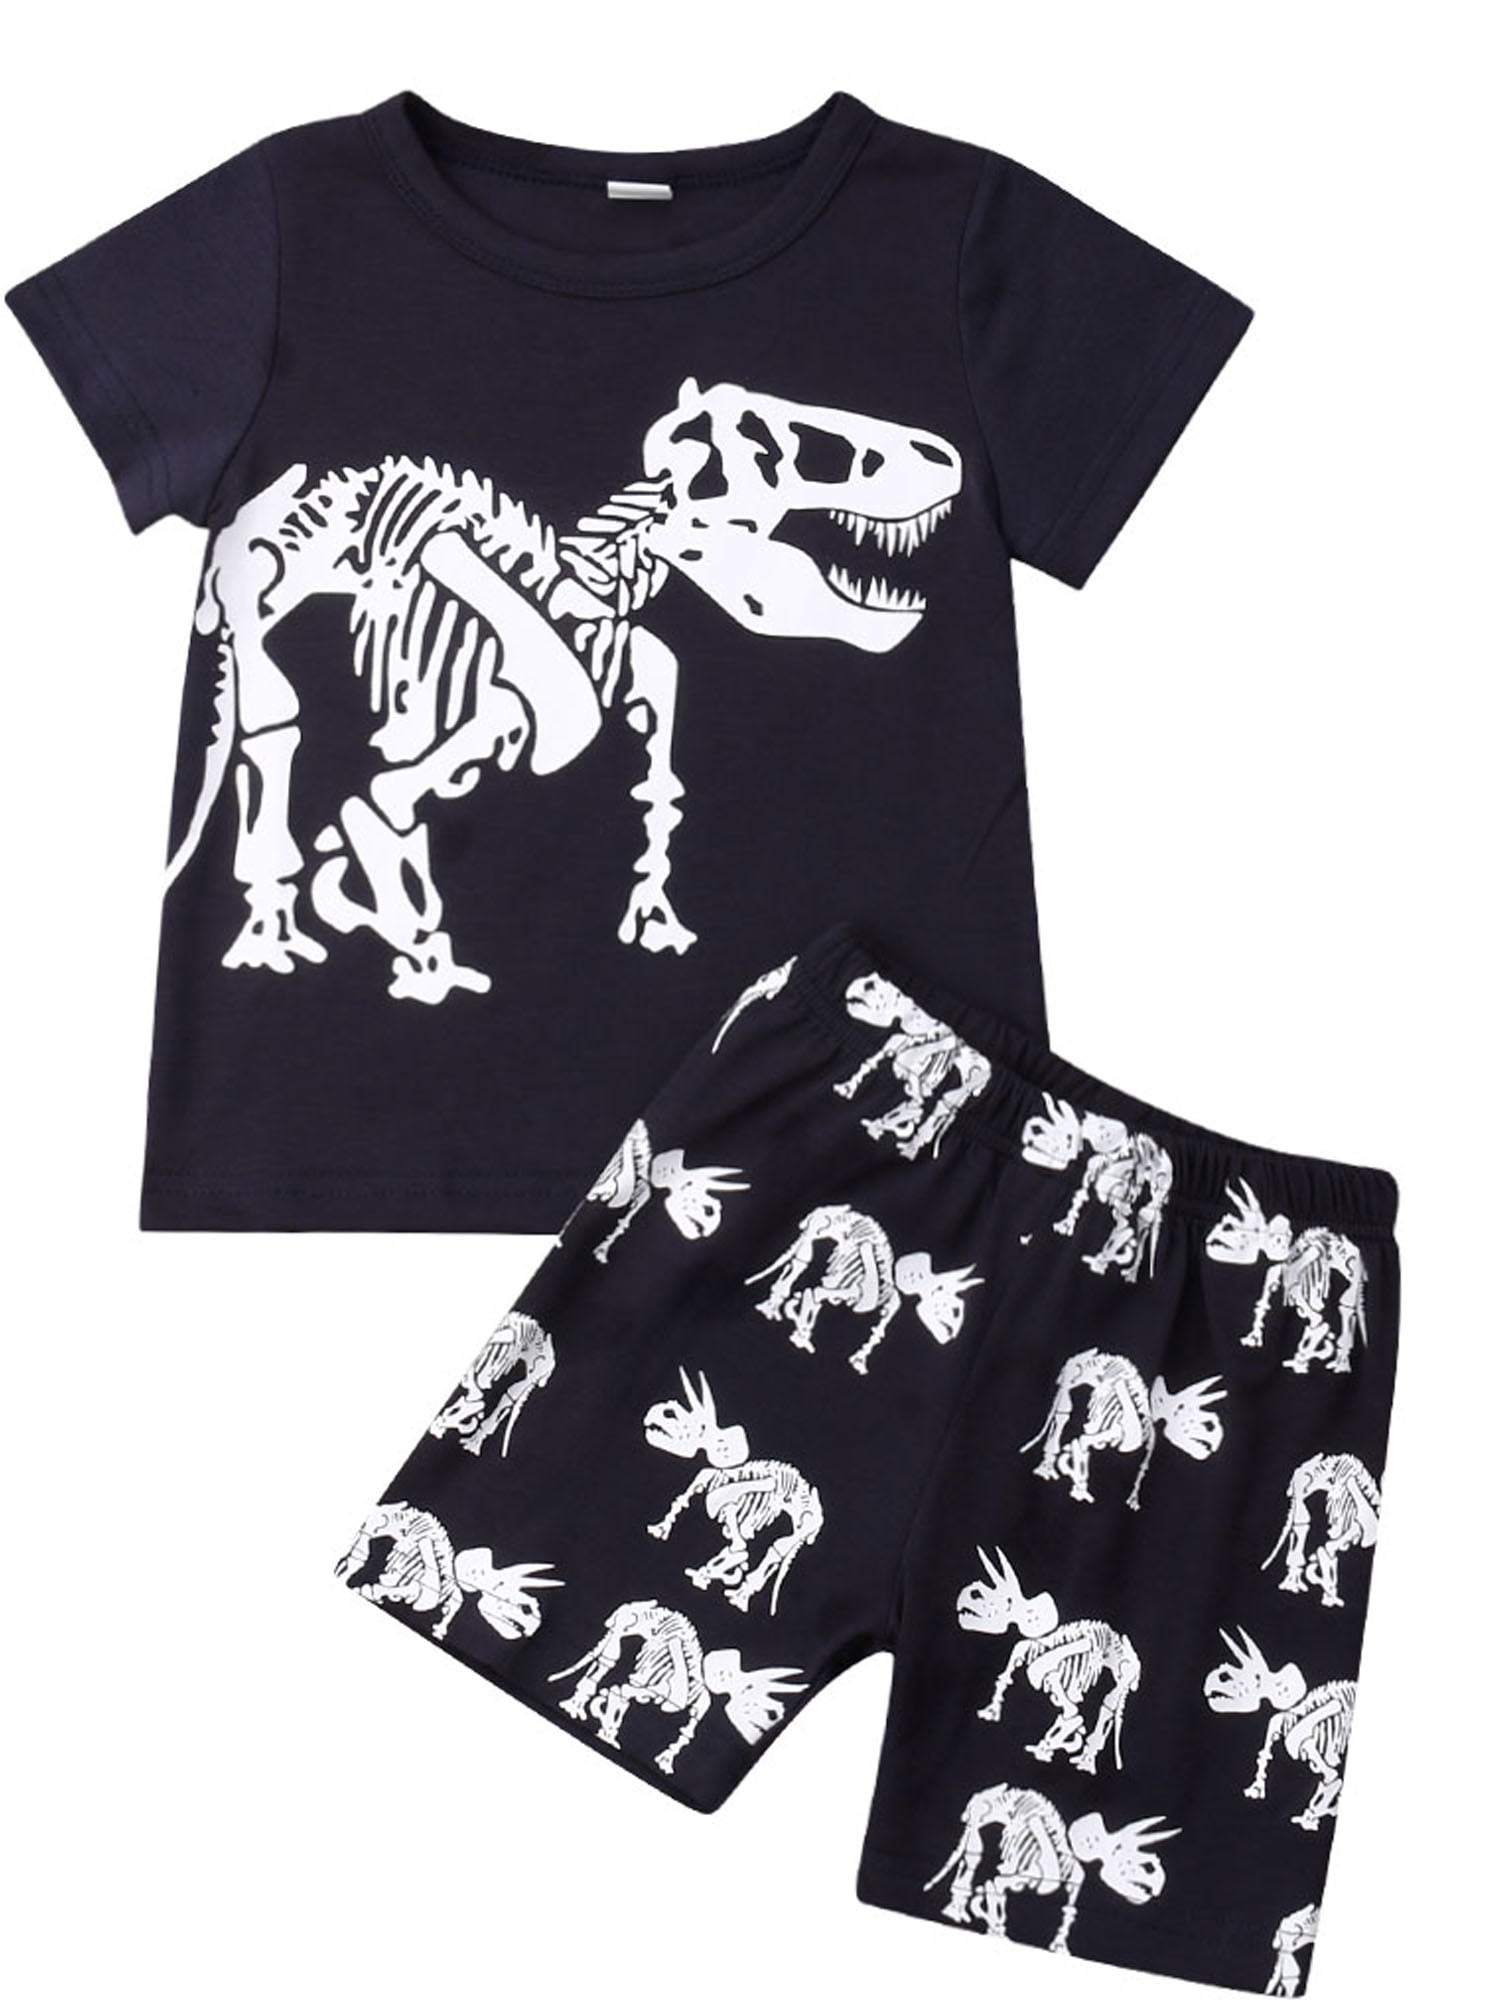 Nwada Kids Clothes for Spring and Summer Unisex Clothing Set Dinosaur Printed Tshirt and Shorts Age 18 Month 6 Years 